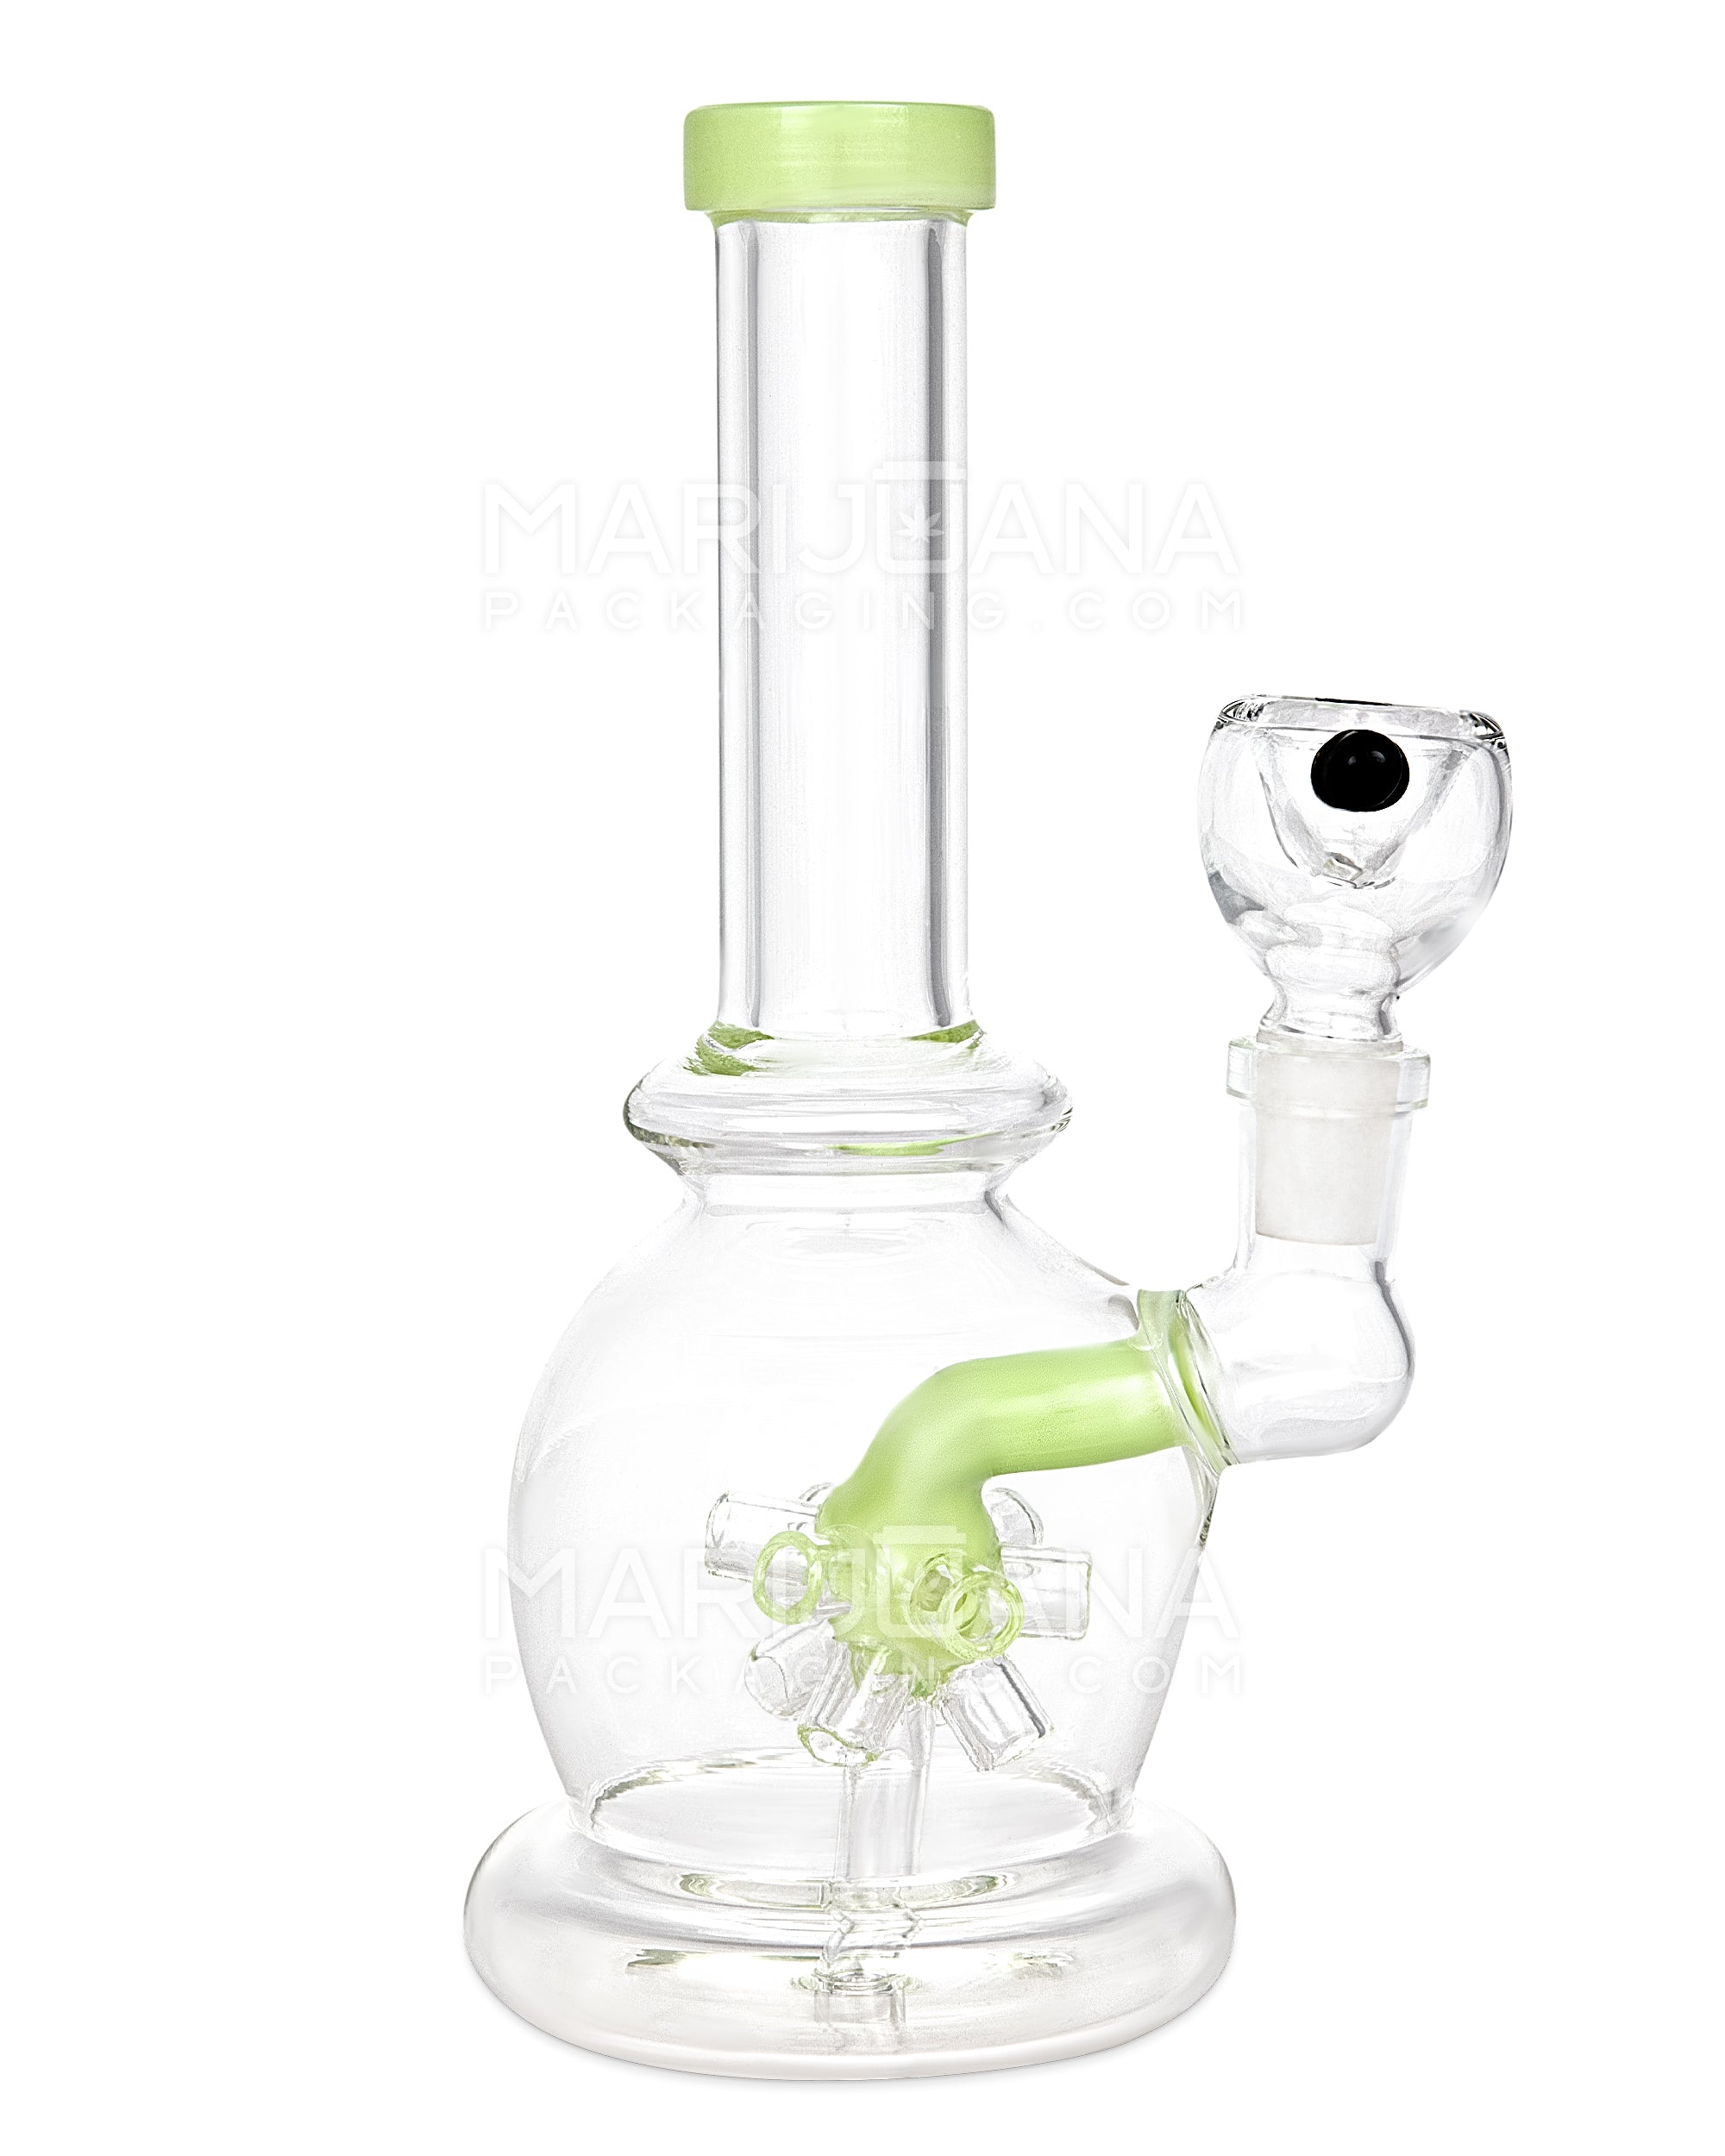 Straight Neck Atomic Perc Glass Egg Water Pipe | 8in Tall - 14mm Bowl - Slime - 1